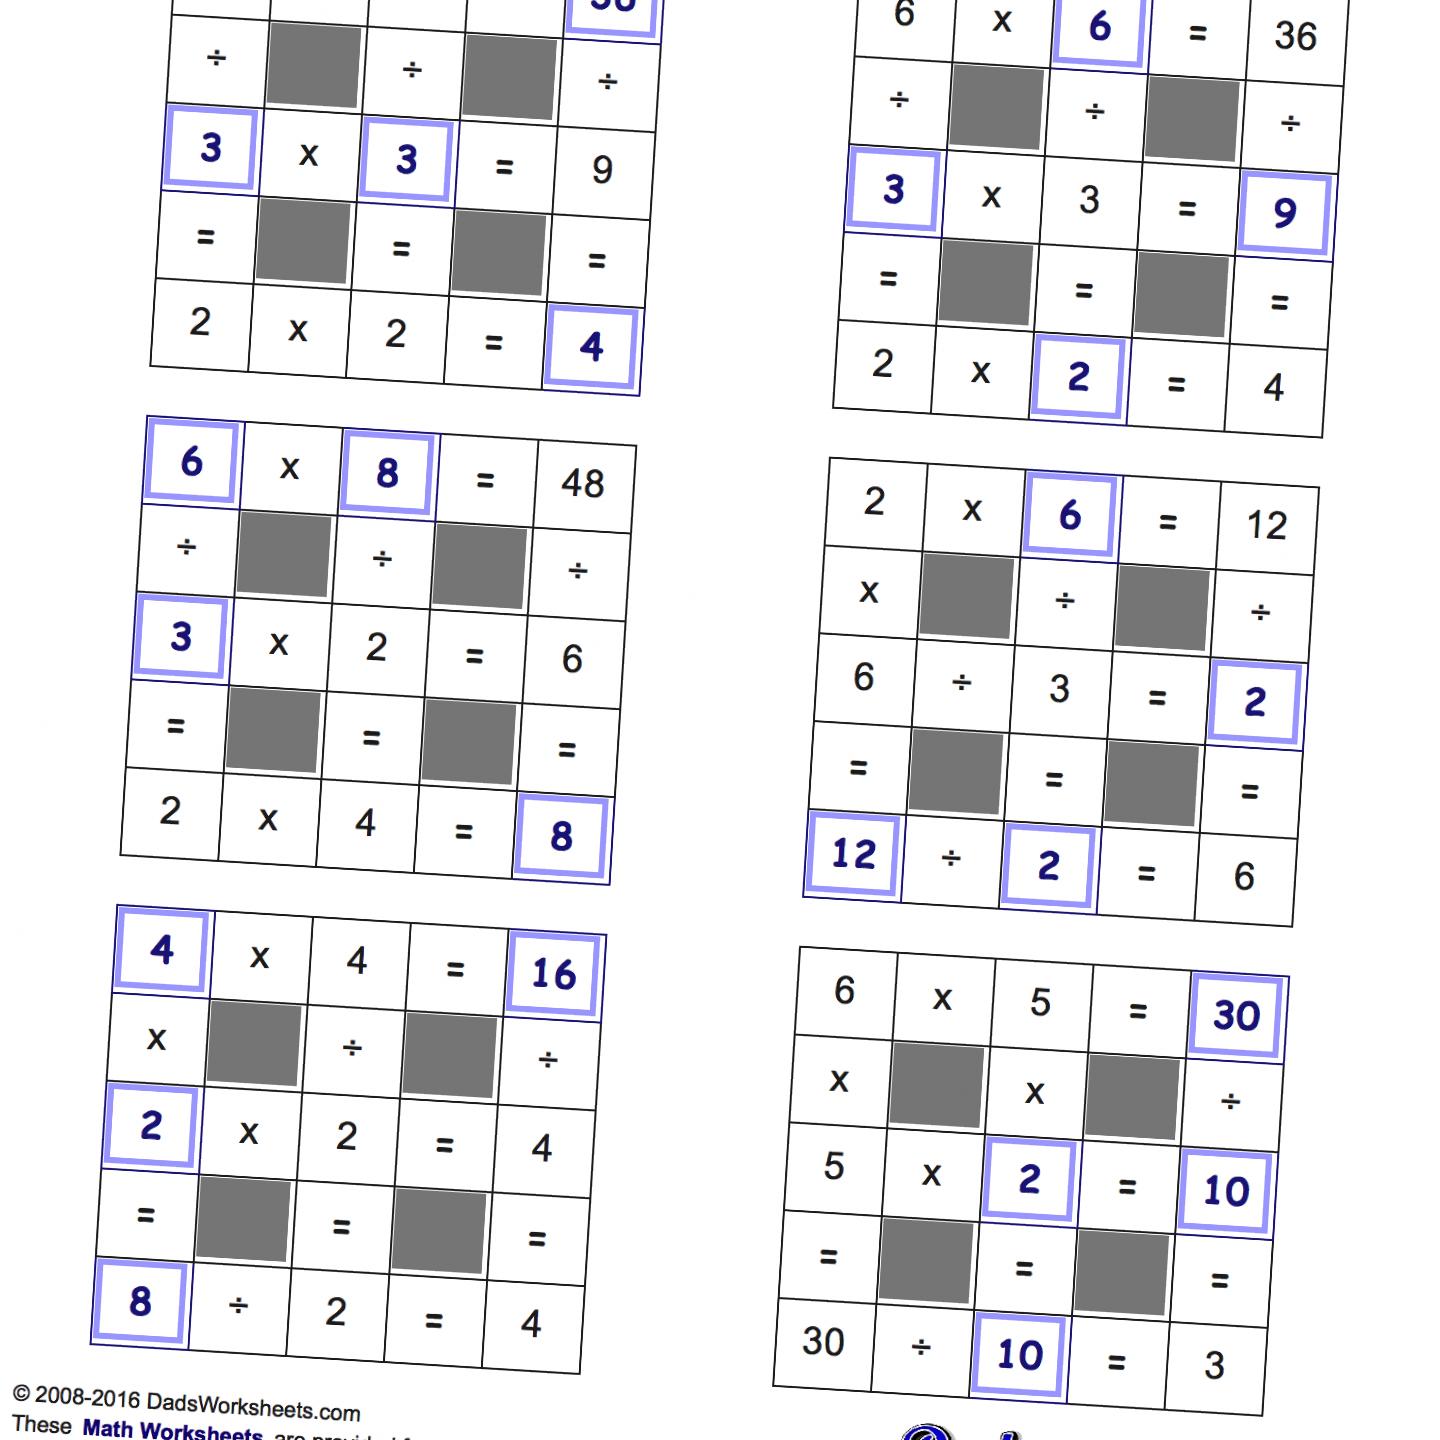 math-worksheets-multiplication-and-division-with-missing-values-negatives-small